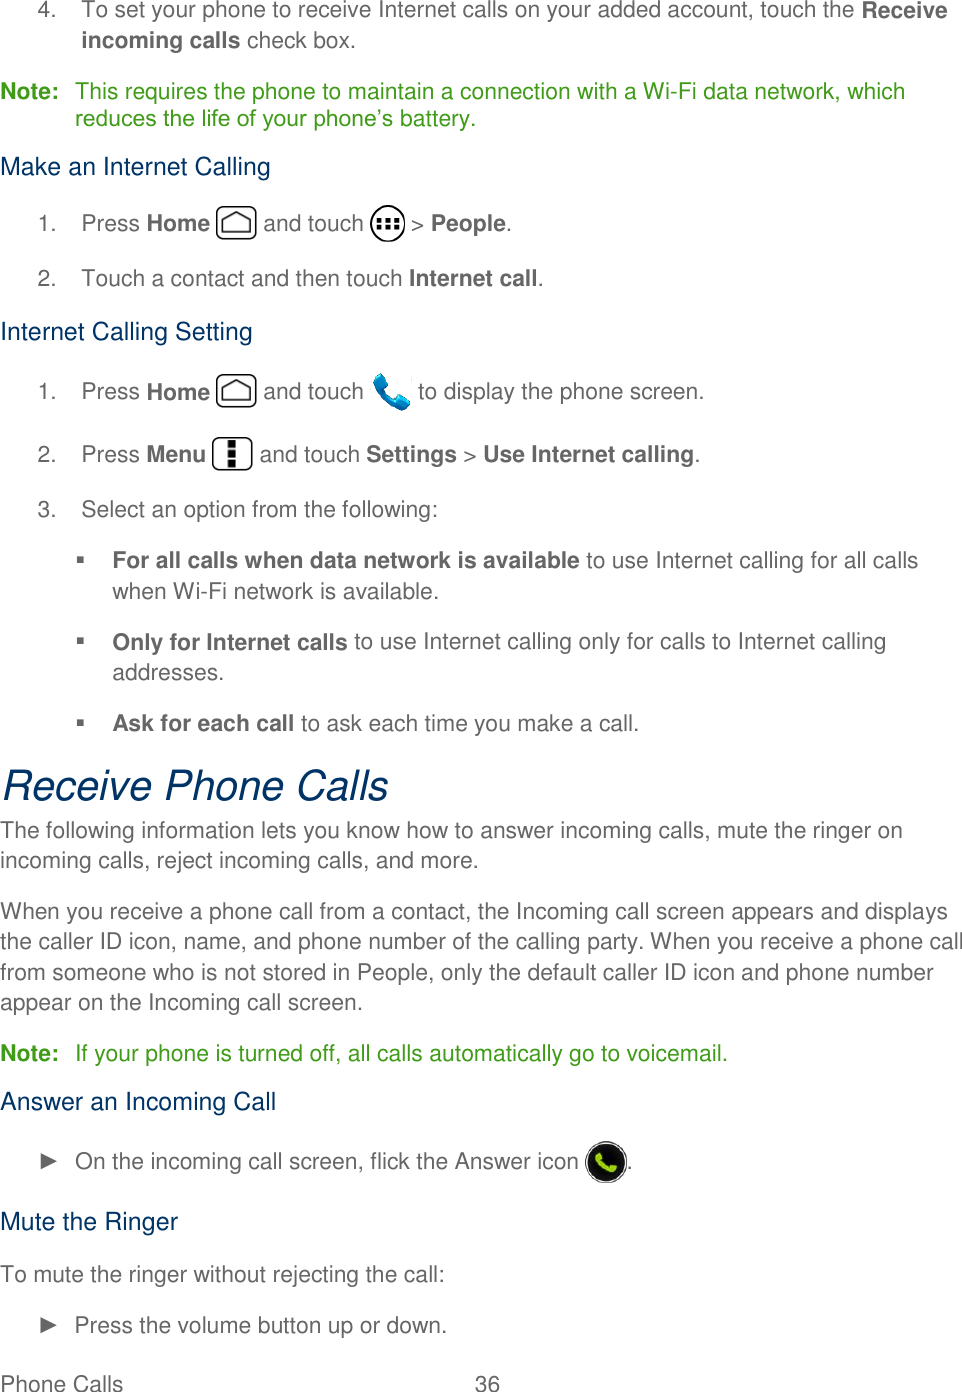  Phone Calls  36   4.  To set your phone to receive Internet calls on your added account, touch the Receive incoming calls check box. Note:  This requires the phone to maintain a connection with a Wi-Fi data network, which reduces the life of your phone’s battery. Make an Internet Calling 1.  Press Home   and touch   &gt; People. 2.  Touch a contact and then touch Internet call. Internet Calling Setting 1.  Press Home   and touch   to display the phone screen. 2.  Press Menu   and touch Settings &gt; Use Internet calling. 3.  Select an option from the following:  For all calls when data network is available to use Internet calling for all calls when Wi-Fi network is available.  Only for Internet calls to use Internet calling only for calls to Internet calling addresses.  Ask for each call to ask each time you make a call. Receive Phone Calls The following information lets you know how to answer incoming calls, mute the ringer on incoming calls, reject incoming calls, and more. When you receive a phone call from a contact, the Incoming call screen appears and displays the caller ID icon, name, and phone number of the calling party. When you receive a phone call from someone who is not stored in People, only the default caller ID icon and phone number appear on the Incoming call screen. Note:  If your phone is turned off, all calls automatically go to voicemail. Answer an Incoming Call ►  On the incoming call screen, flick the Answer icon  . Mute the Ringer To mute the ringer without rejecting the call: ►  Press the volume button up or down. 